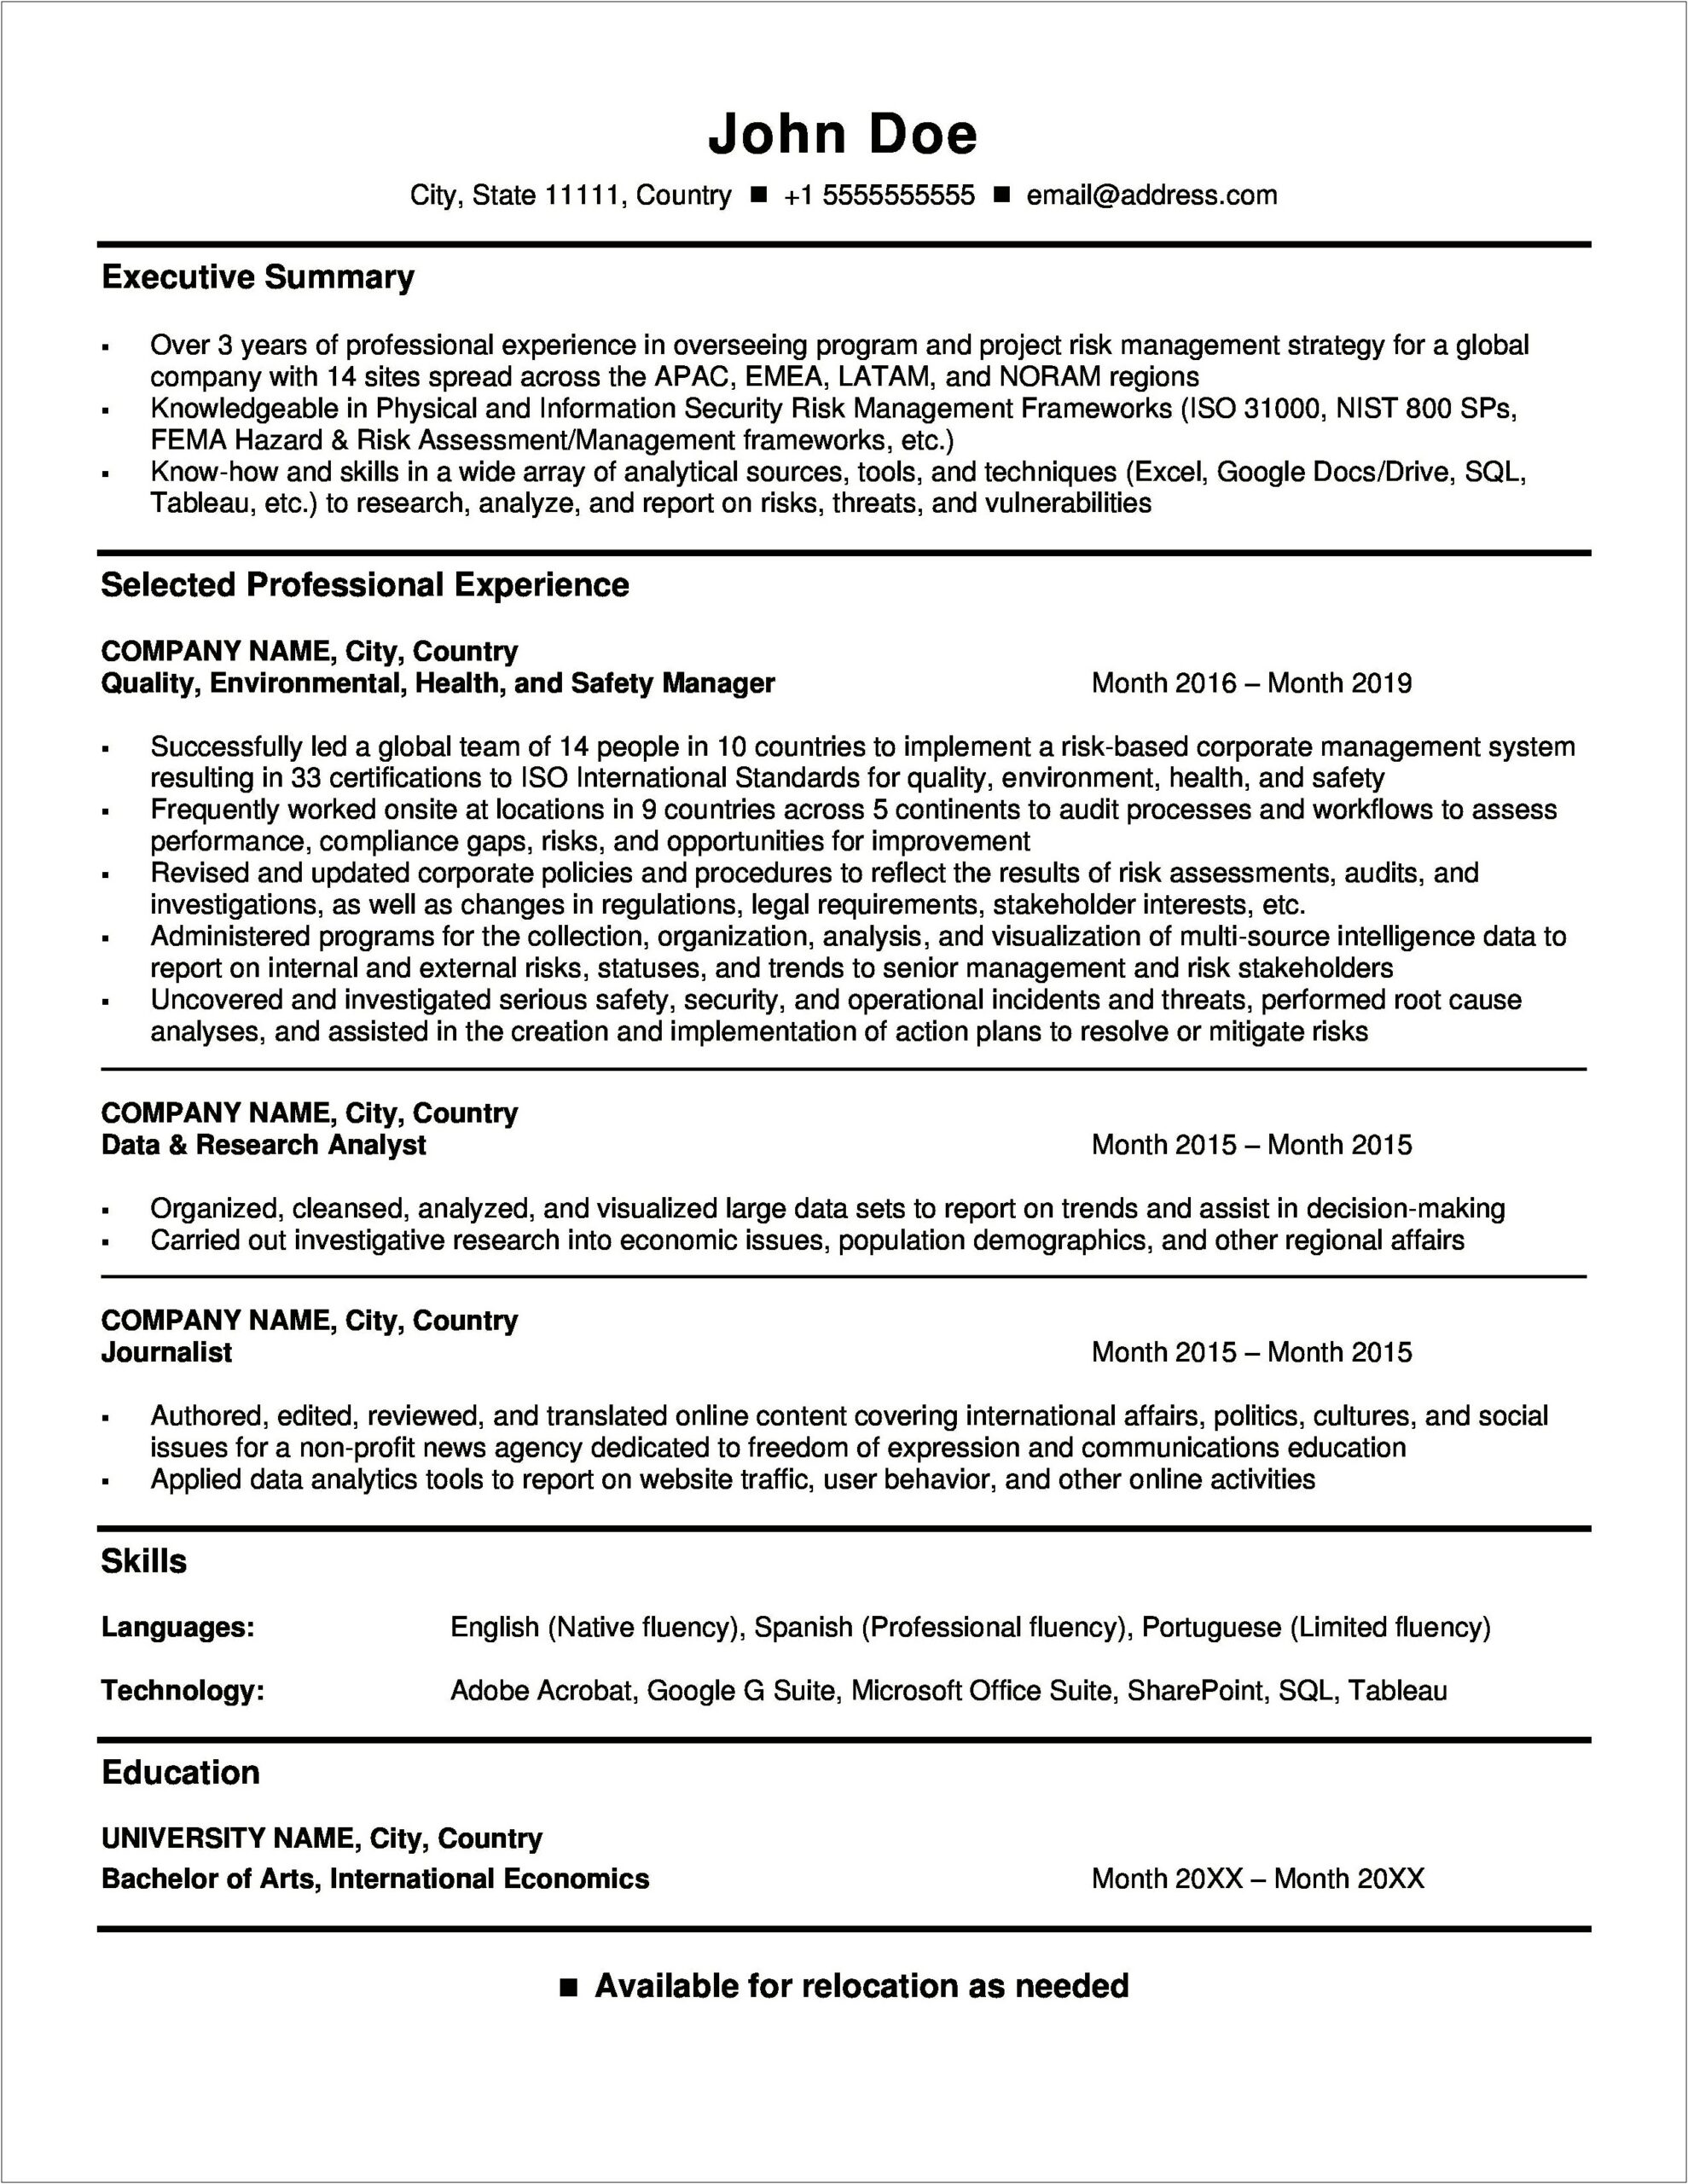 Resume Of Travel Agency Manager